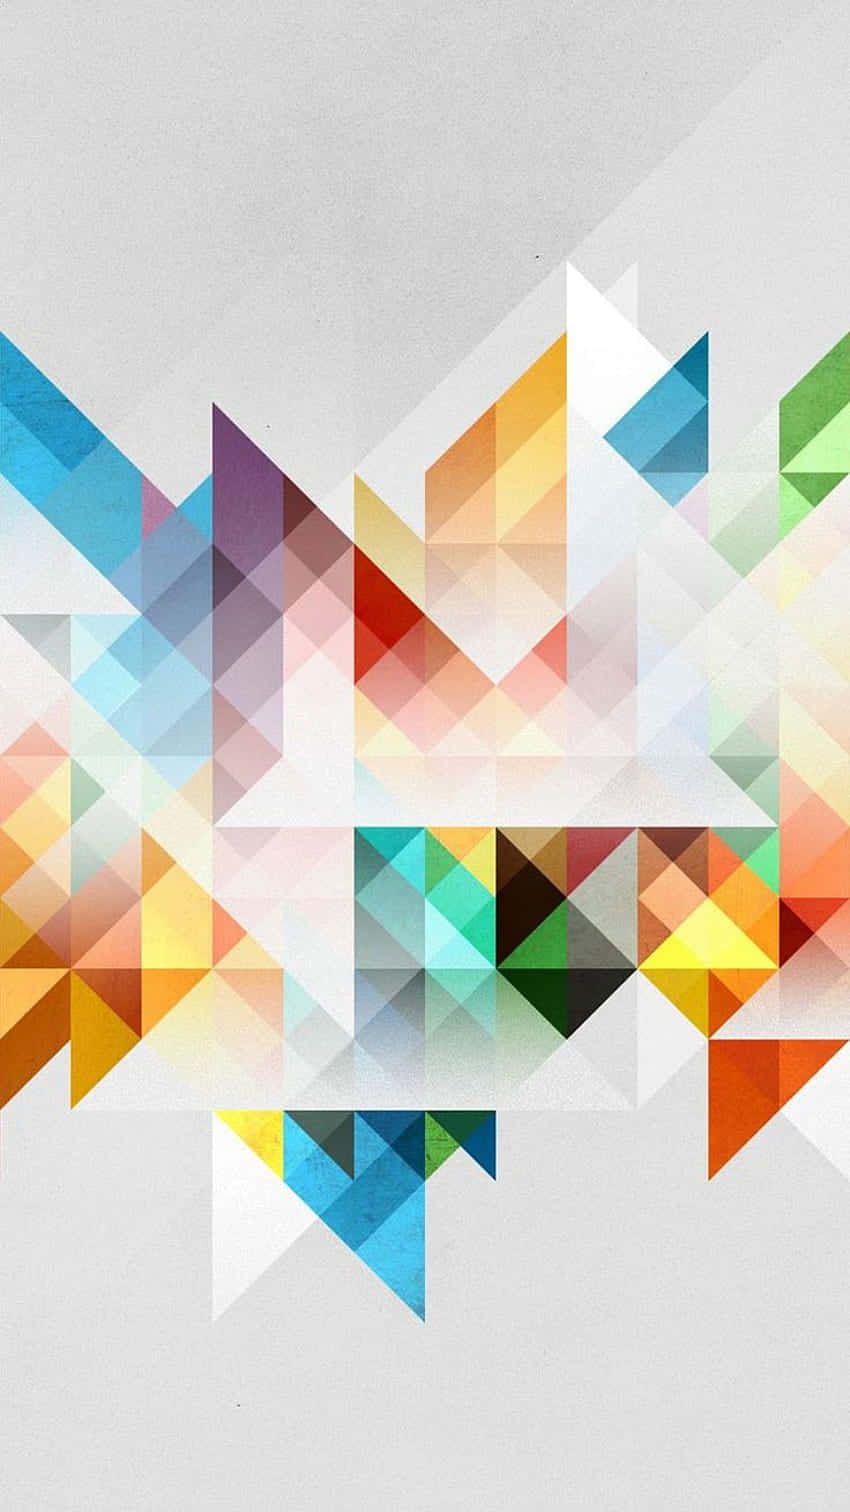 Make A Statement with the Geometric Iphone Wallpaper